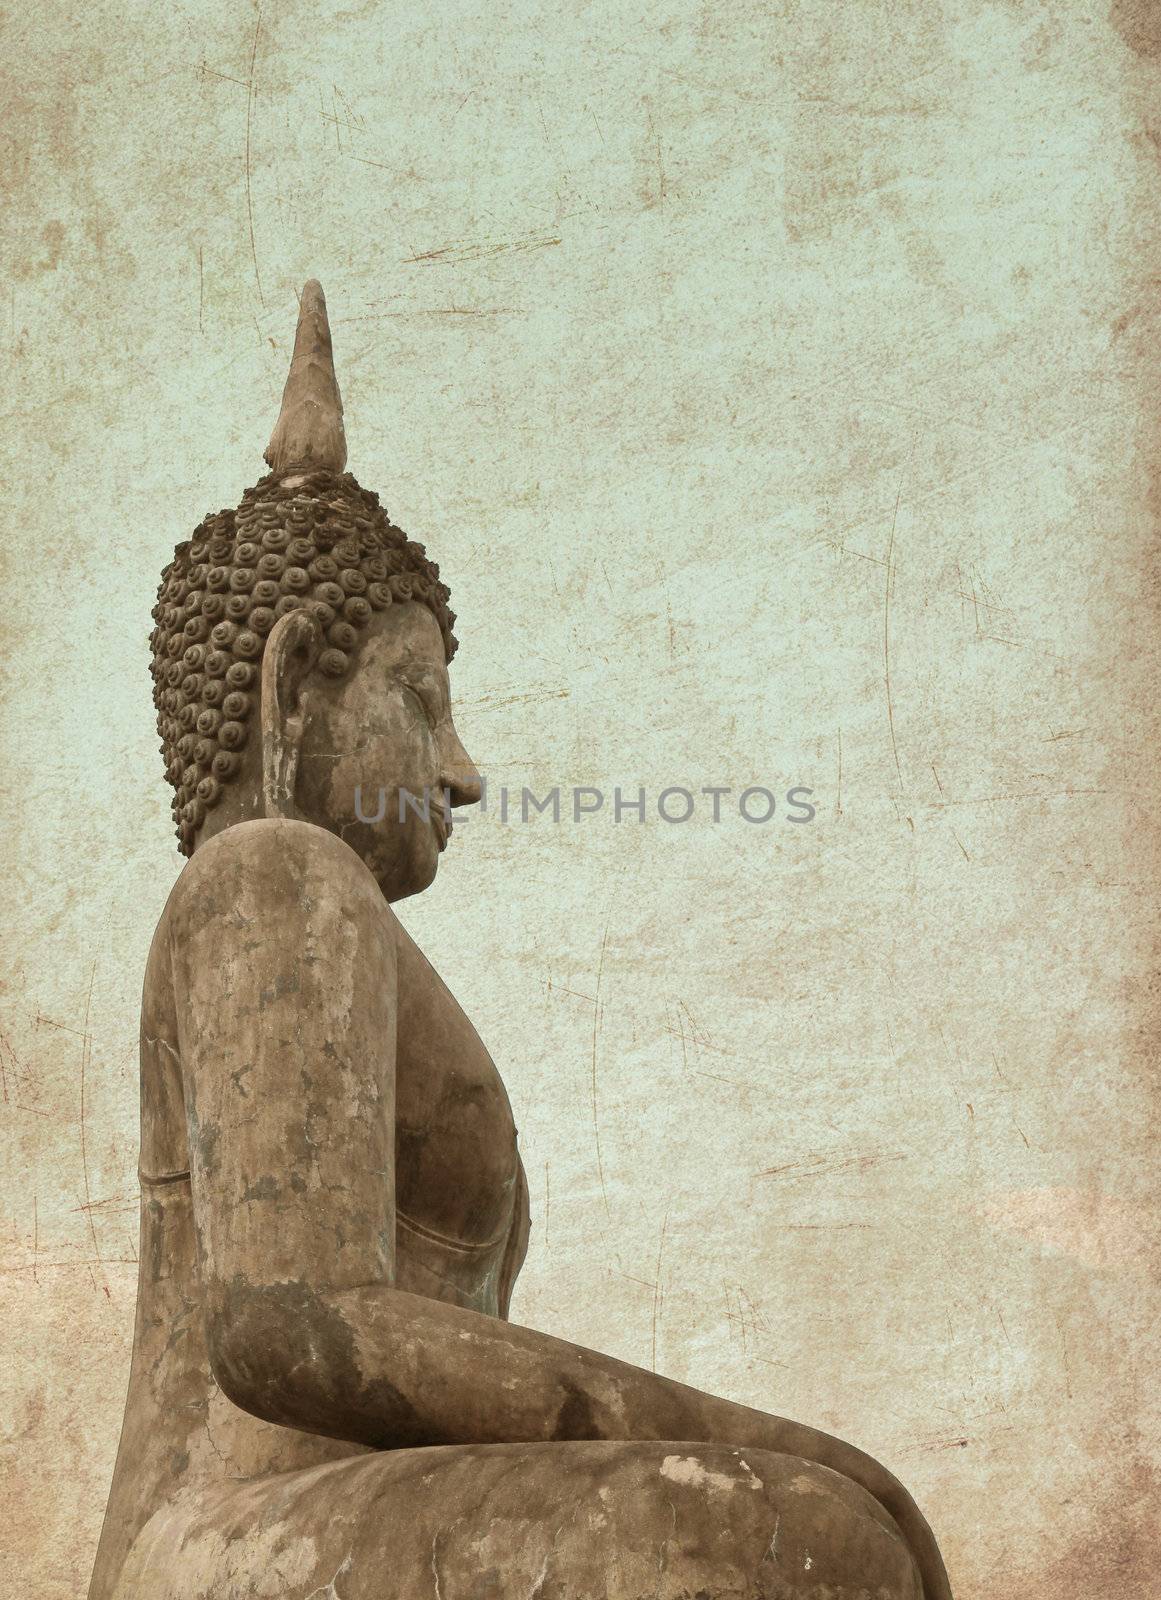 Buddha Statue in Wat Mahathat Temple inThailand, photo in old im by nuchylee